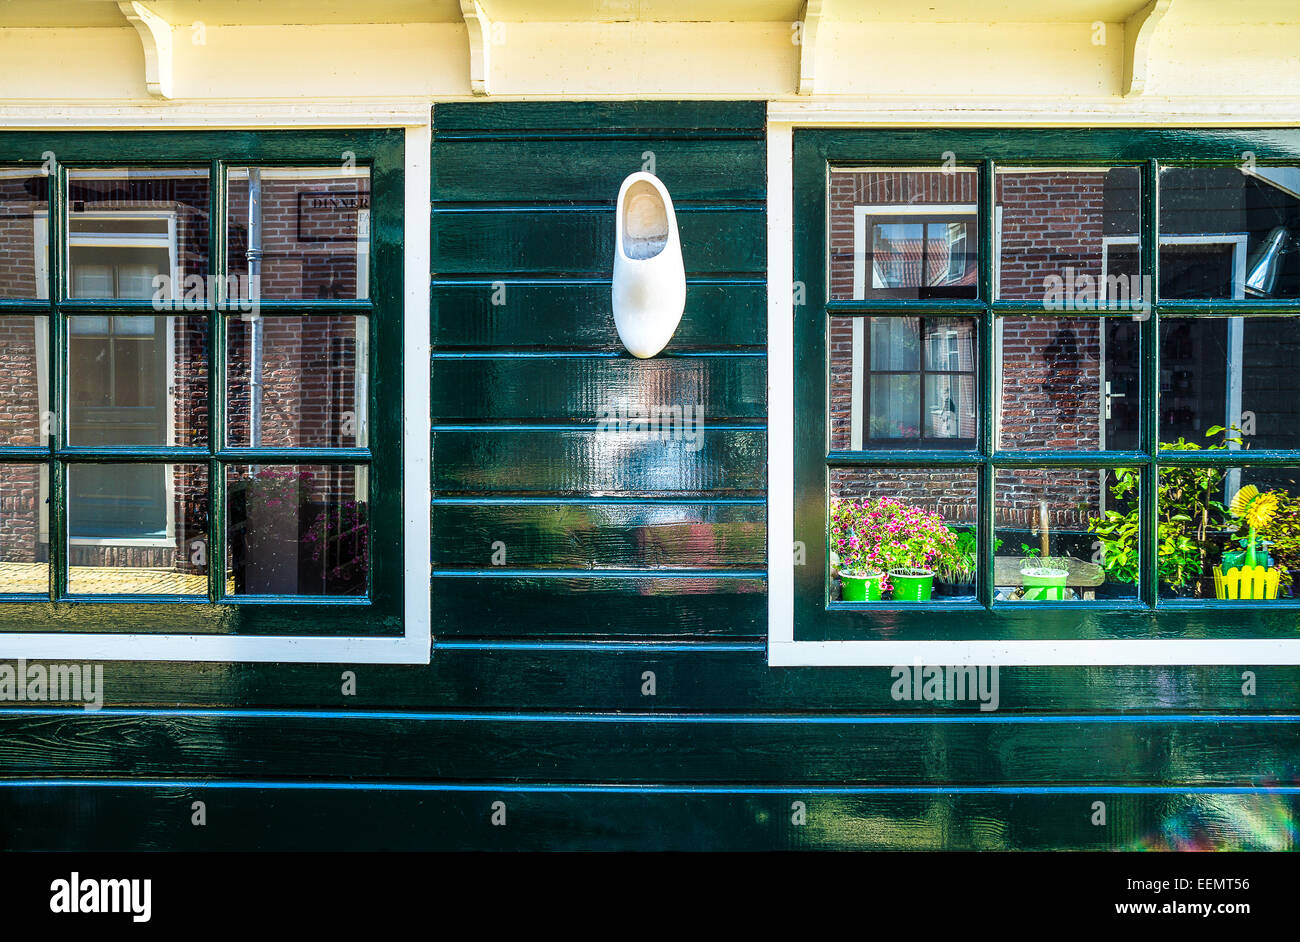 Amsterdam, Waterland district, Volendam, detail of a typical houses of the town center Stock Photo